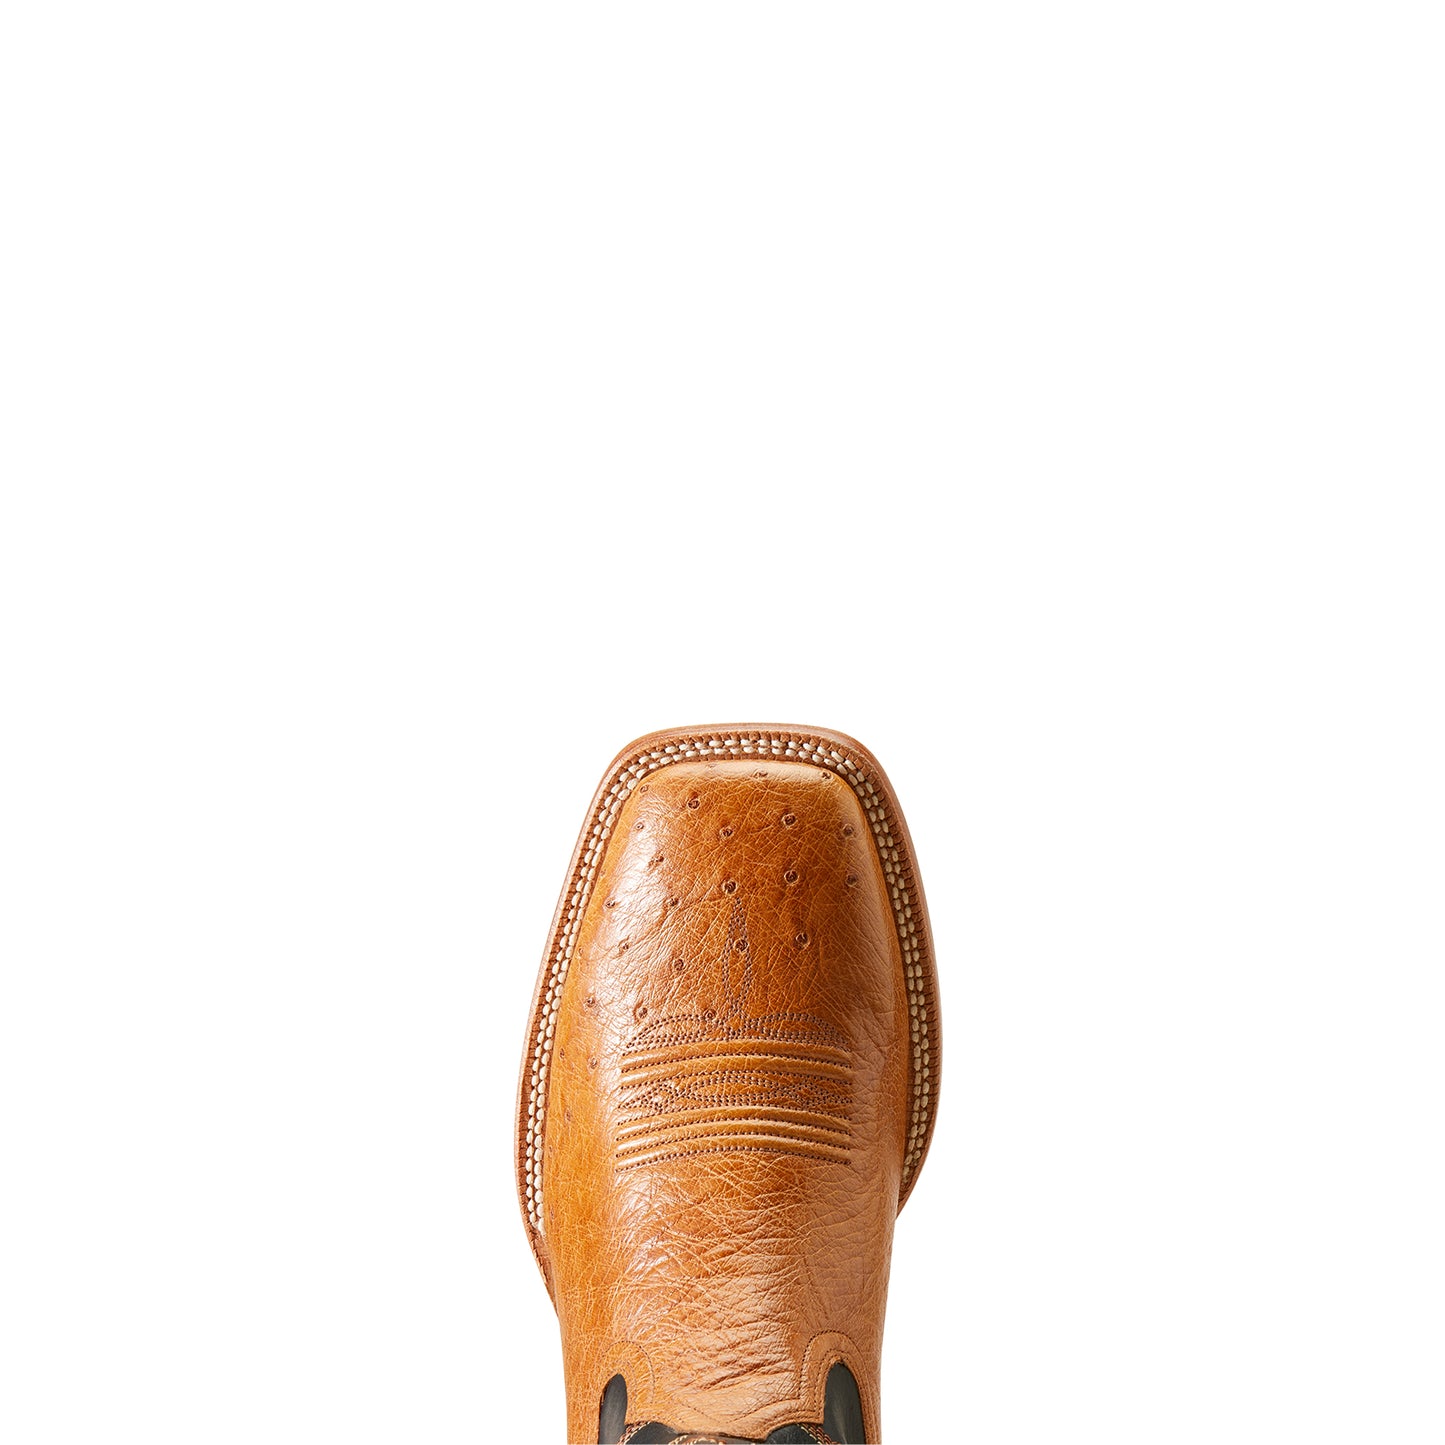 ARIAT HAYWIRE ANTIQUE TAN  SMOOTH QUILL OSTRICH BOOT